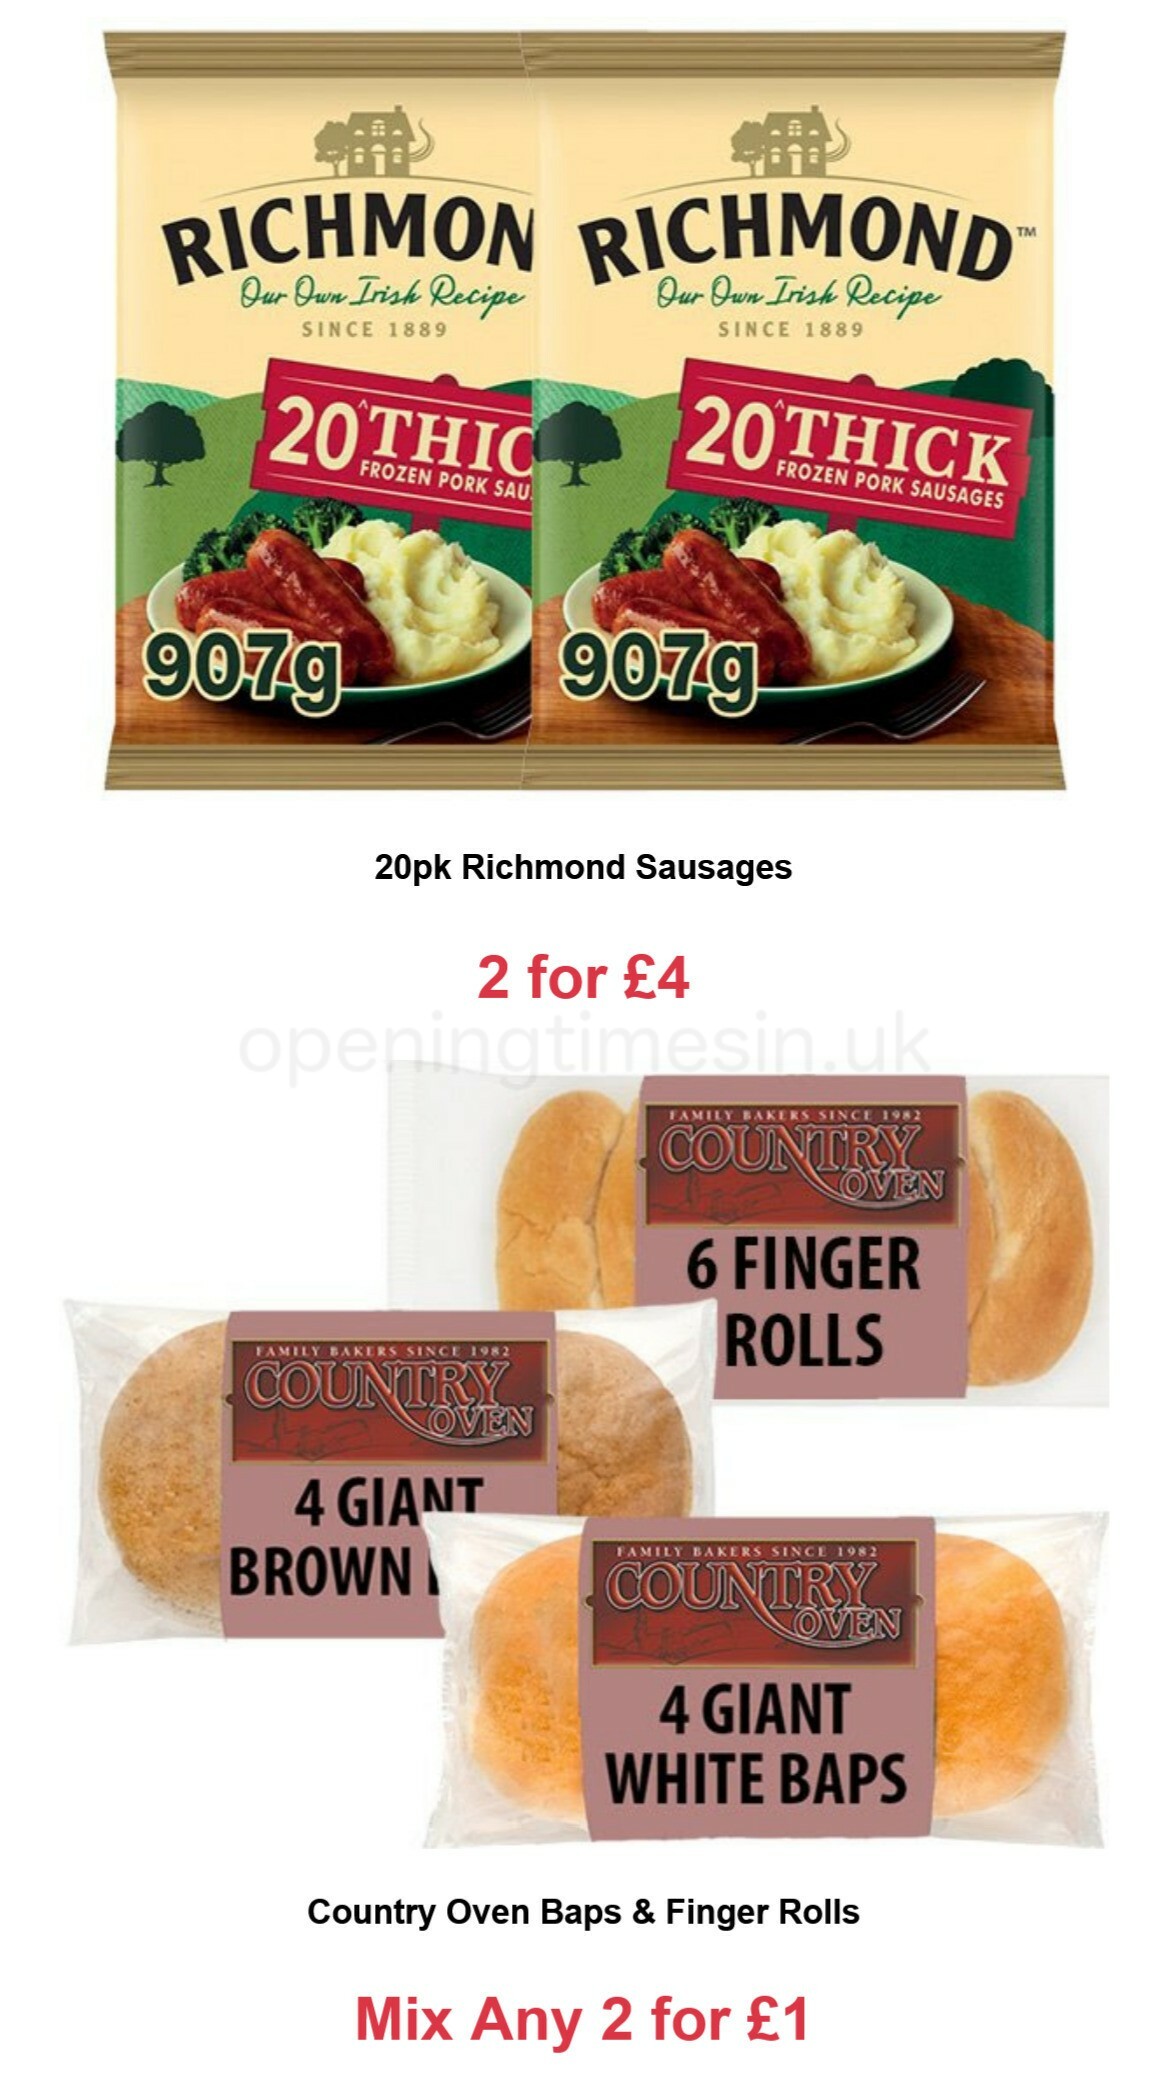 Farmfoods Offers from 27 May